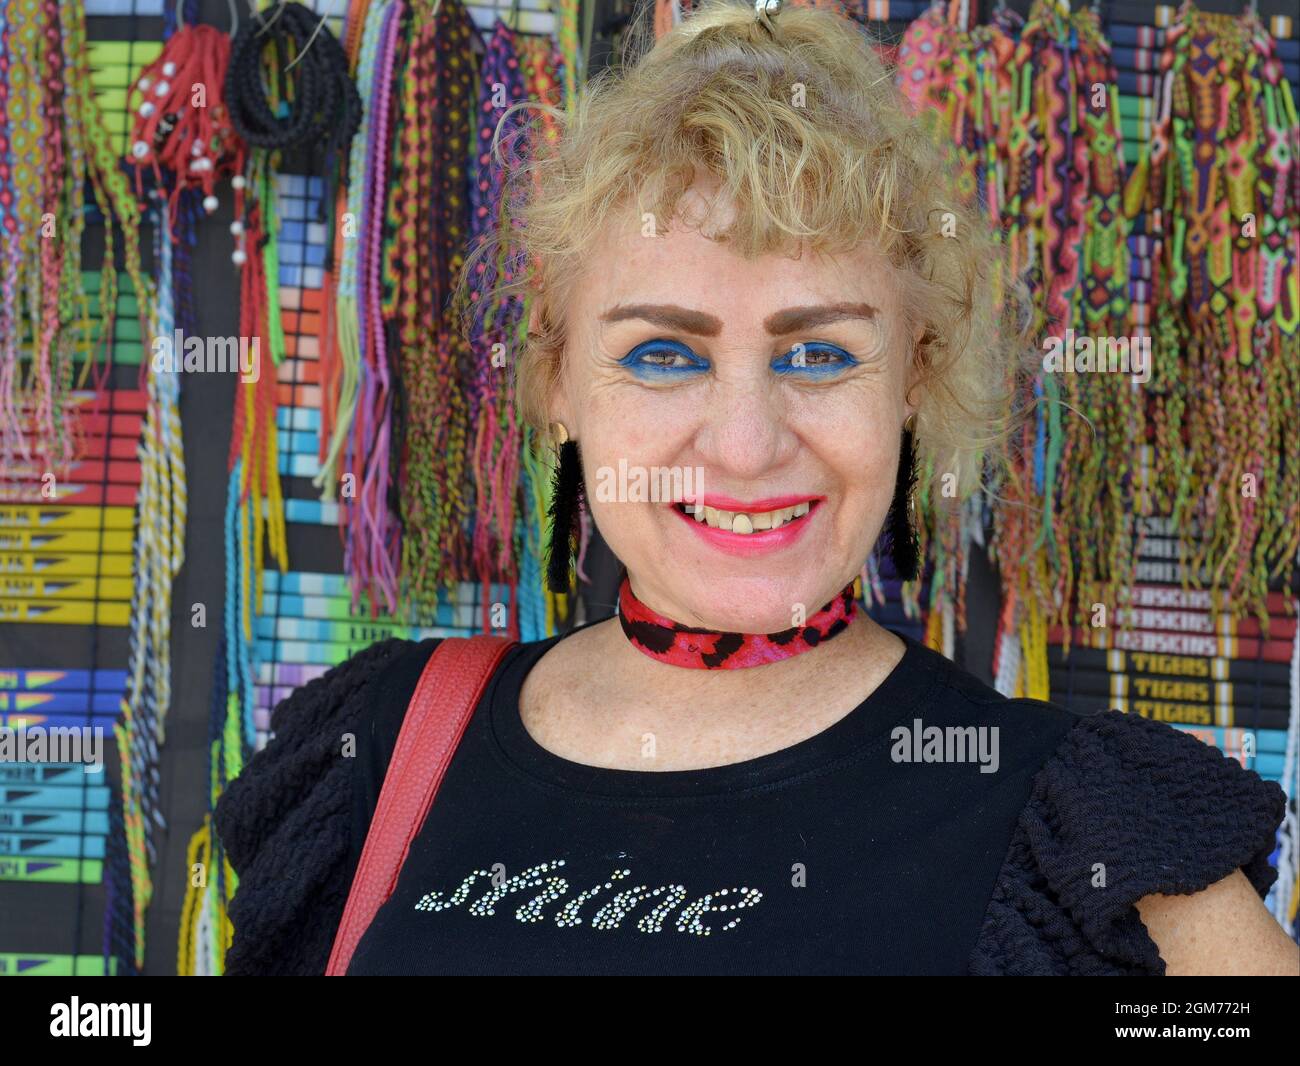 Attractive positive elderly Caucasian woman with heavy eye makeup and blond dyed hair smiles and poses in front of a colorful souvenir display. Stock Photo